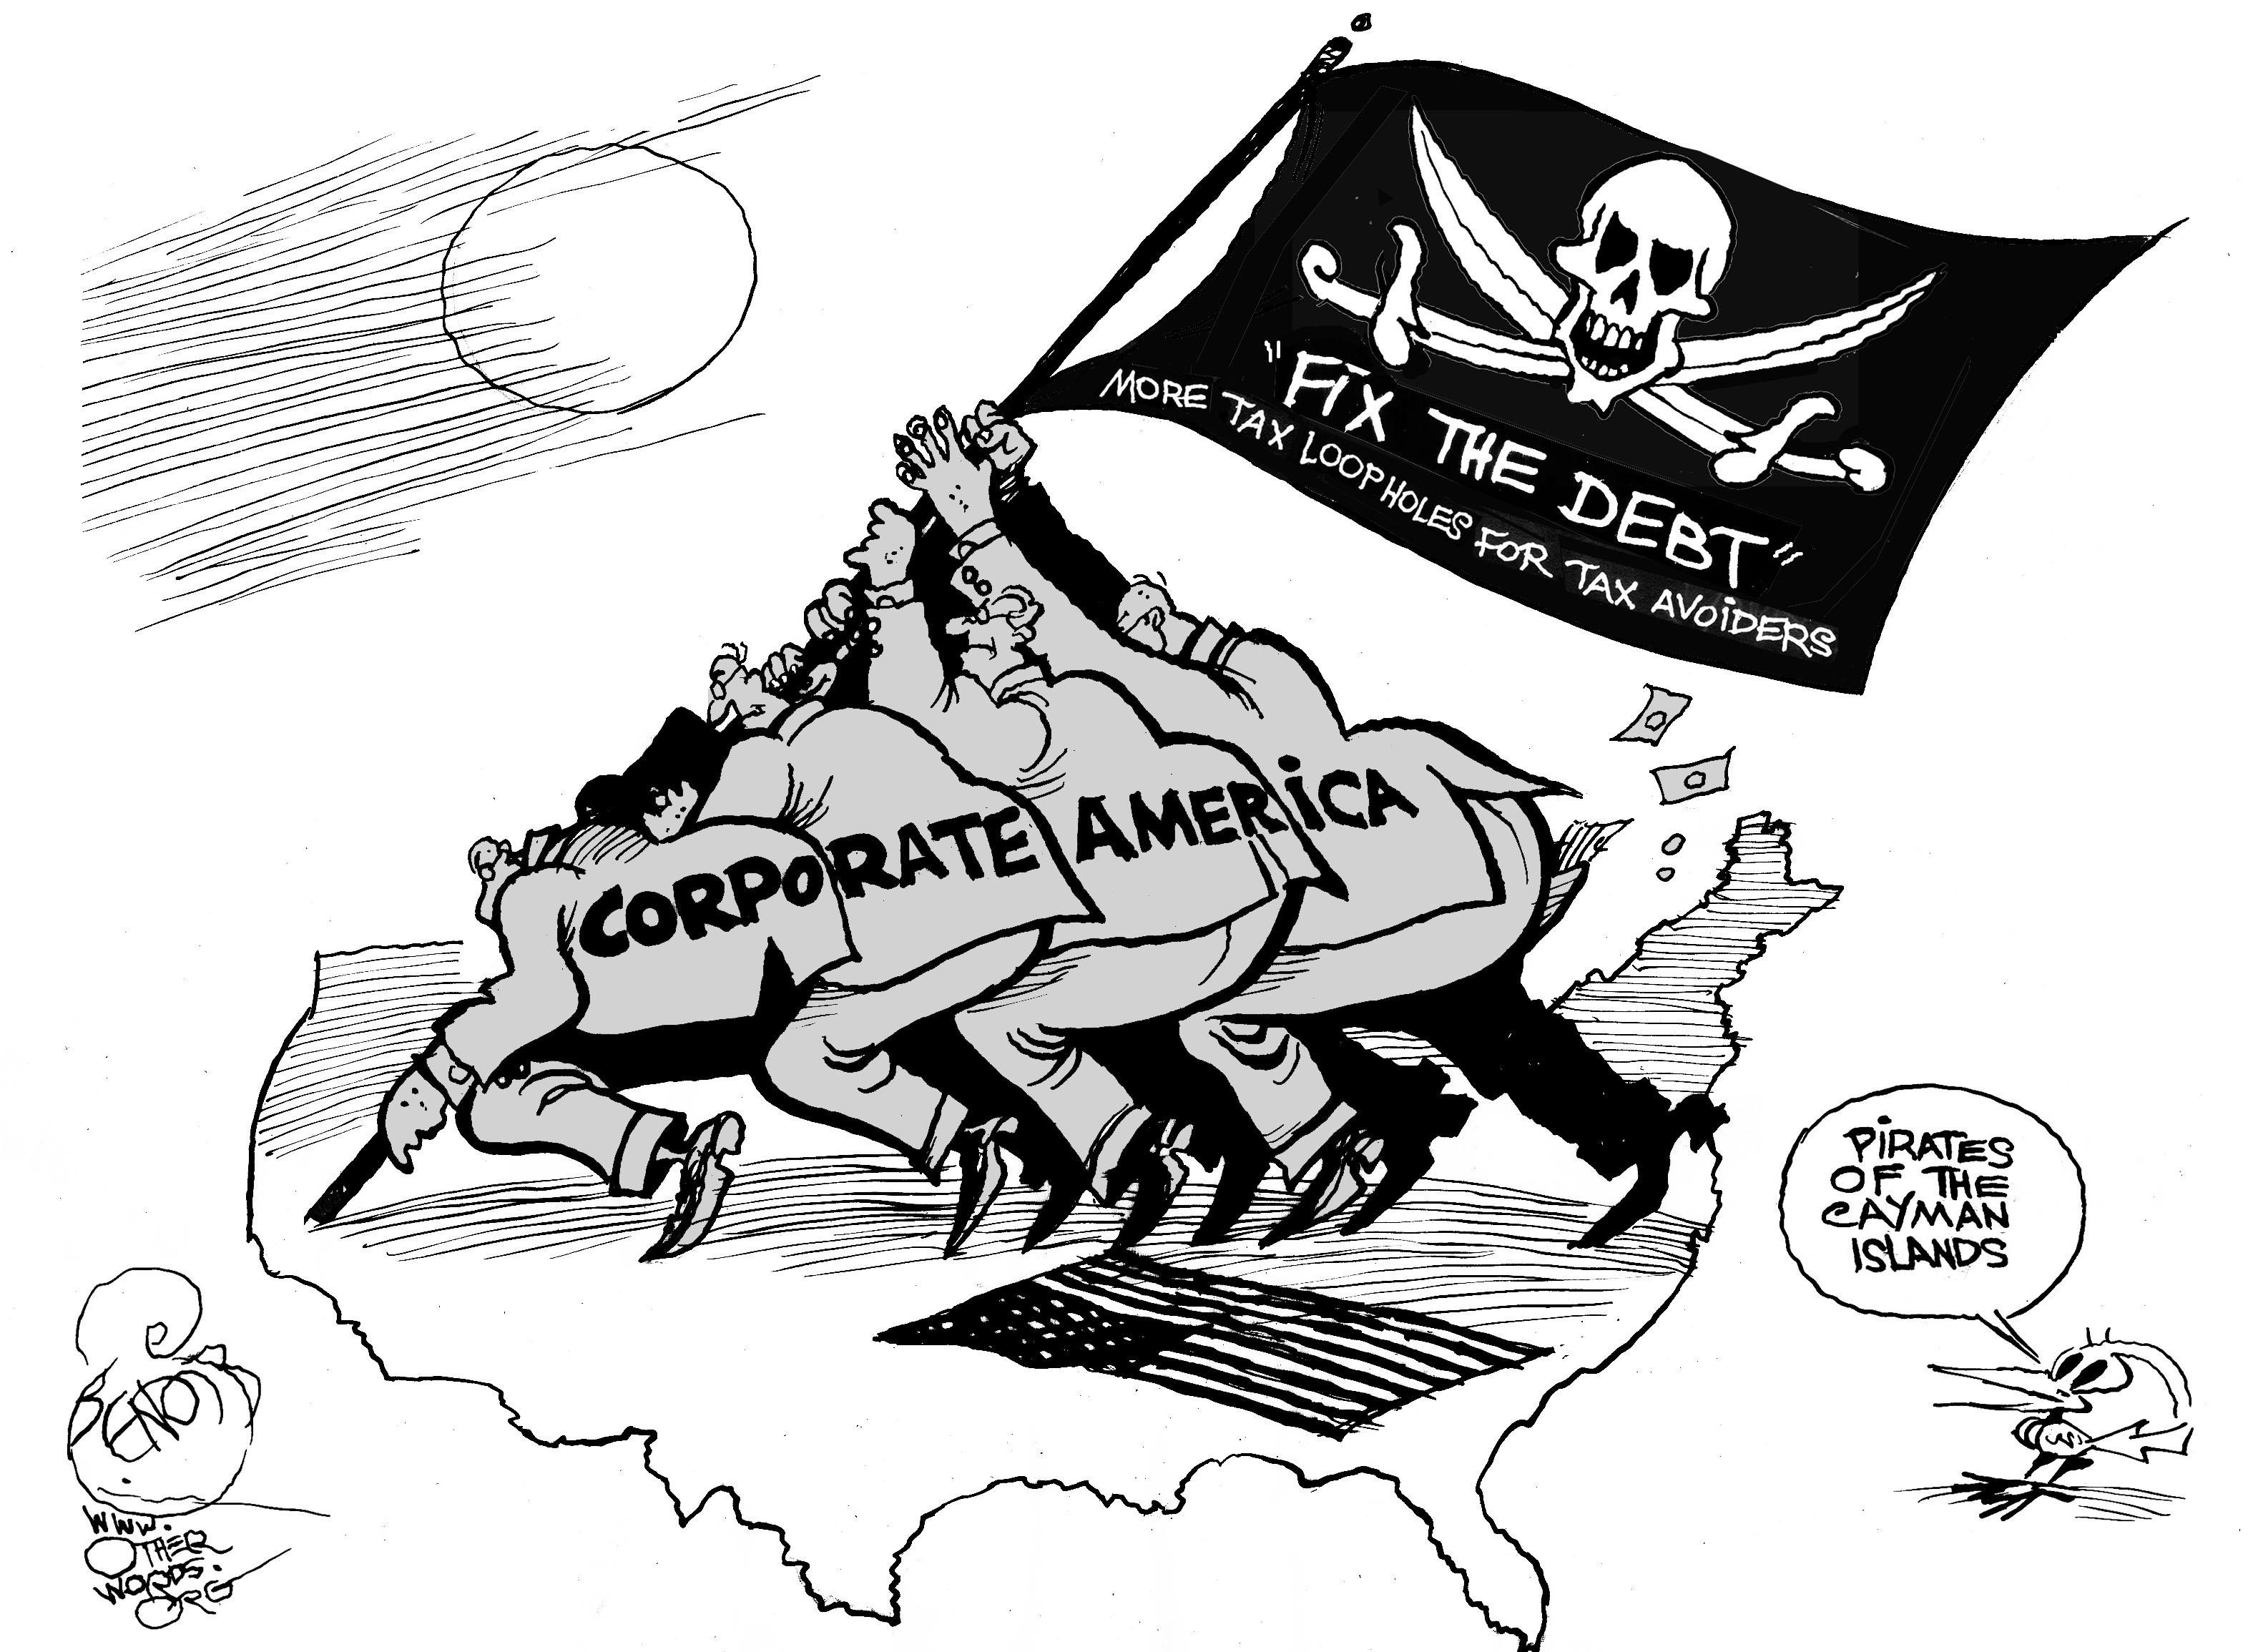 New Report: Corporate Pirates of the Caribbean